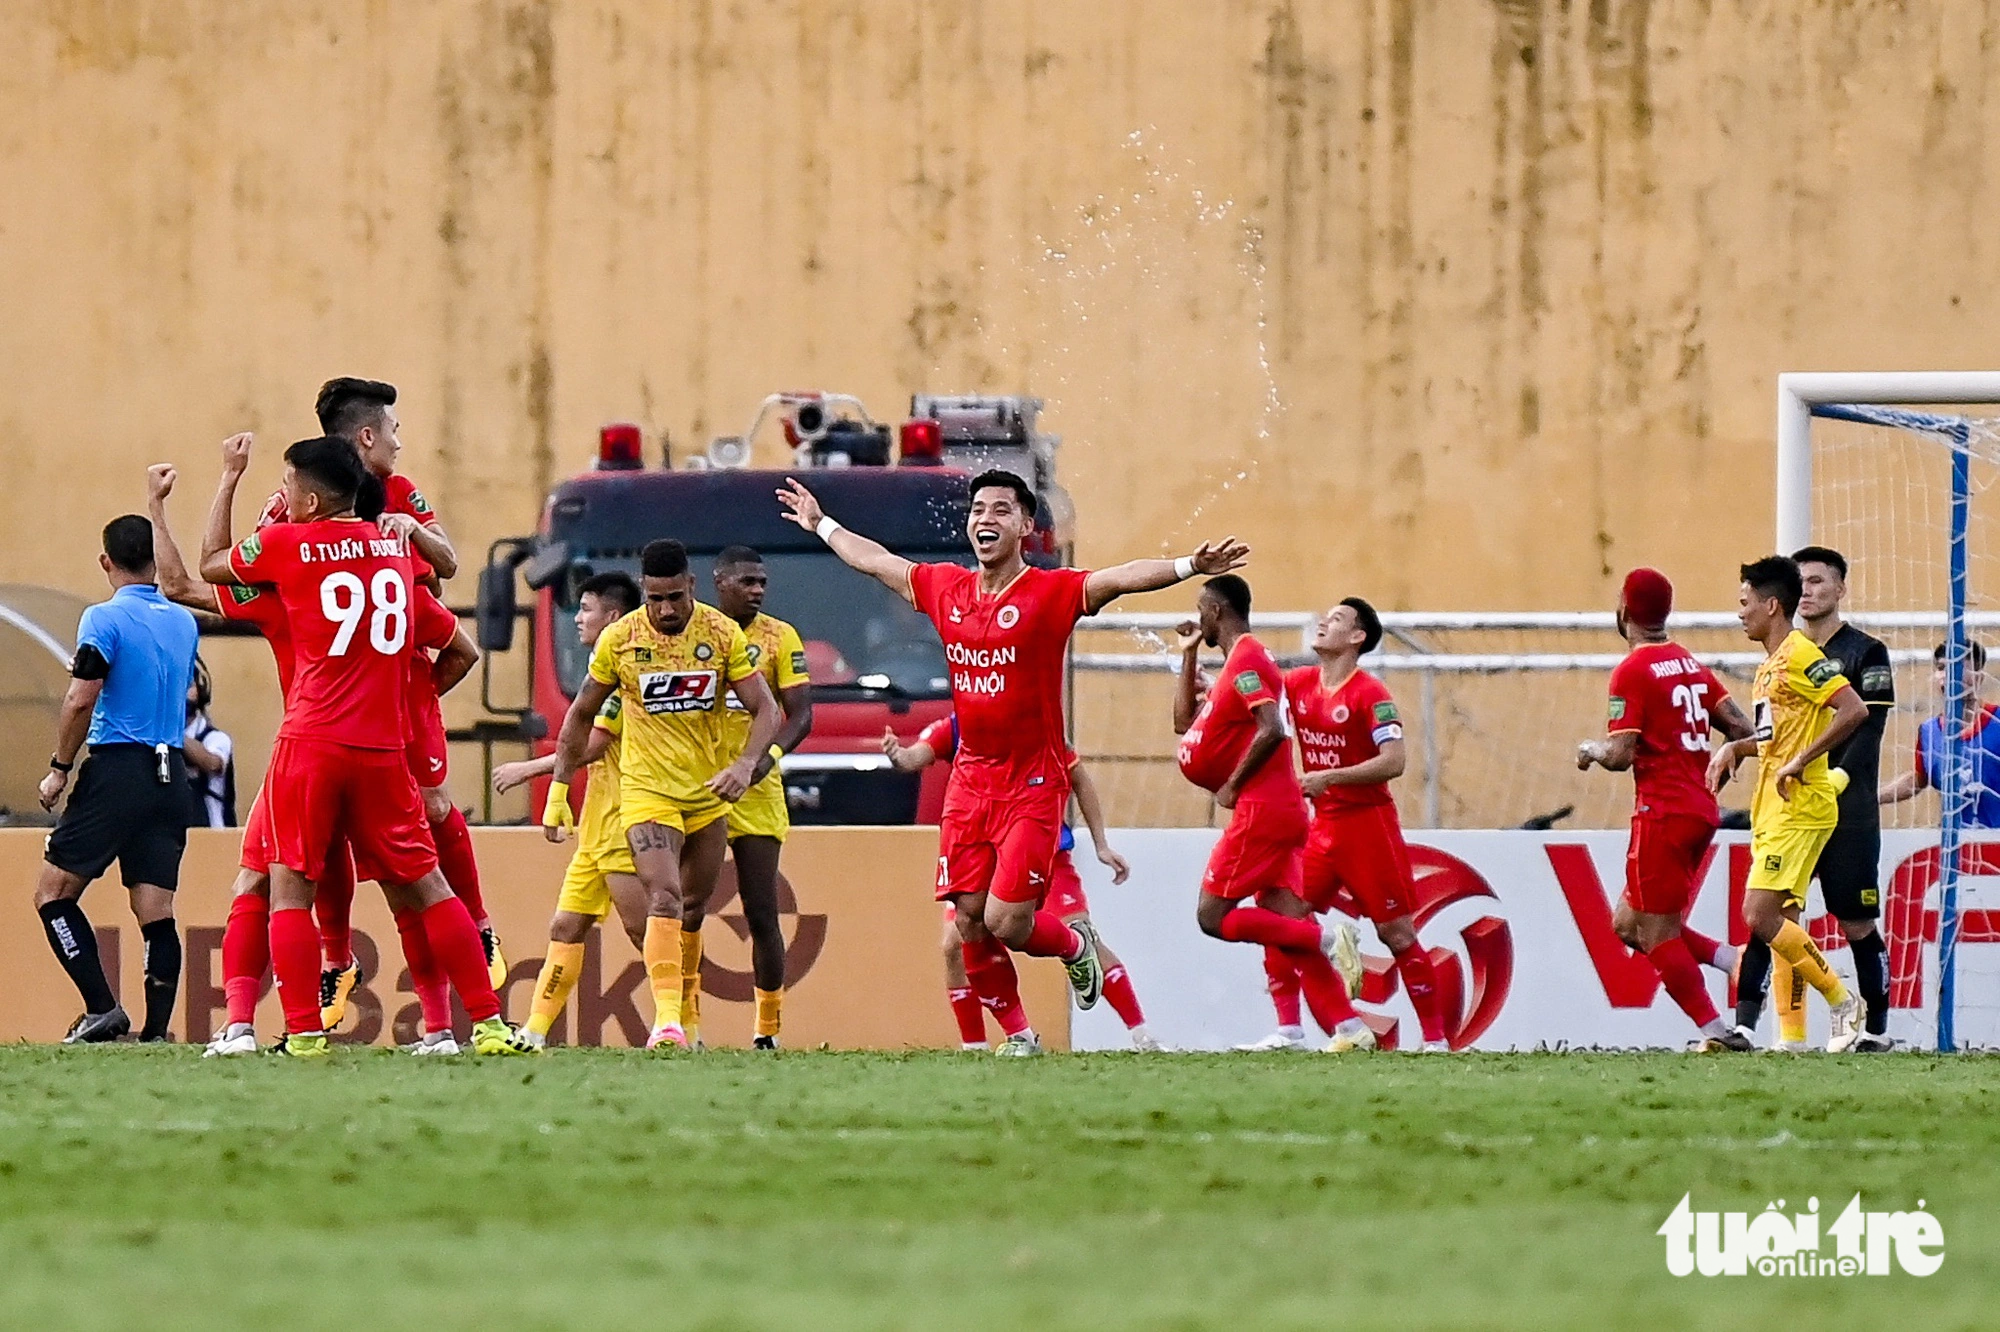 Cong An Hanoi FC players celebrate their goal during the V-League 1 2023 season’s last game against Thanh Hoa FC at Hang Day Stadium in Hanoi, August 27, 2023. Photo: Nam Tran / Tuoi Tre